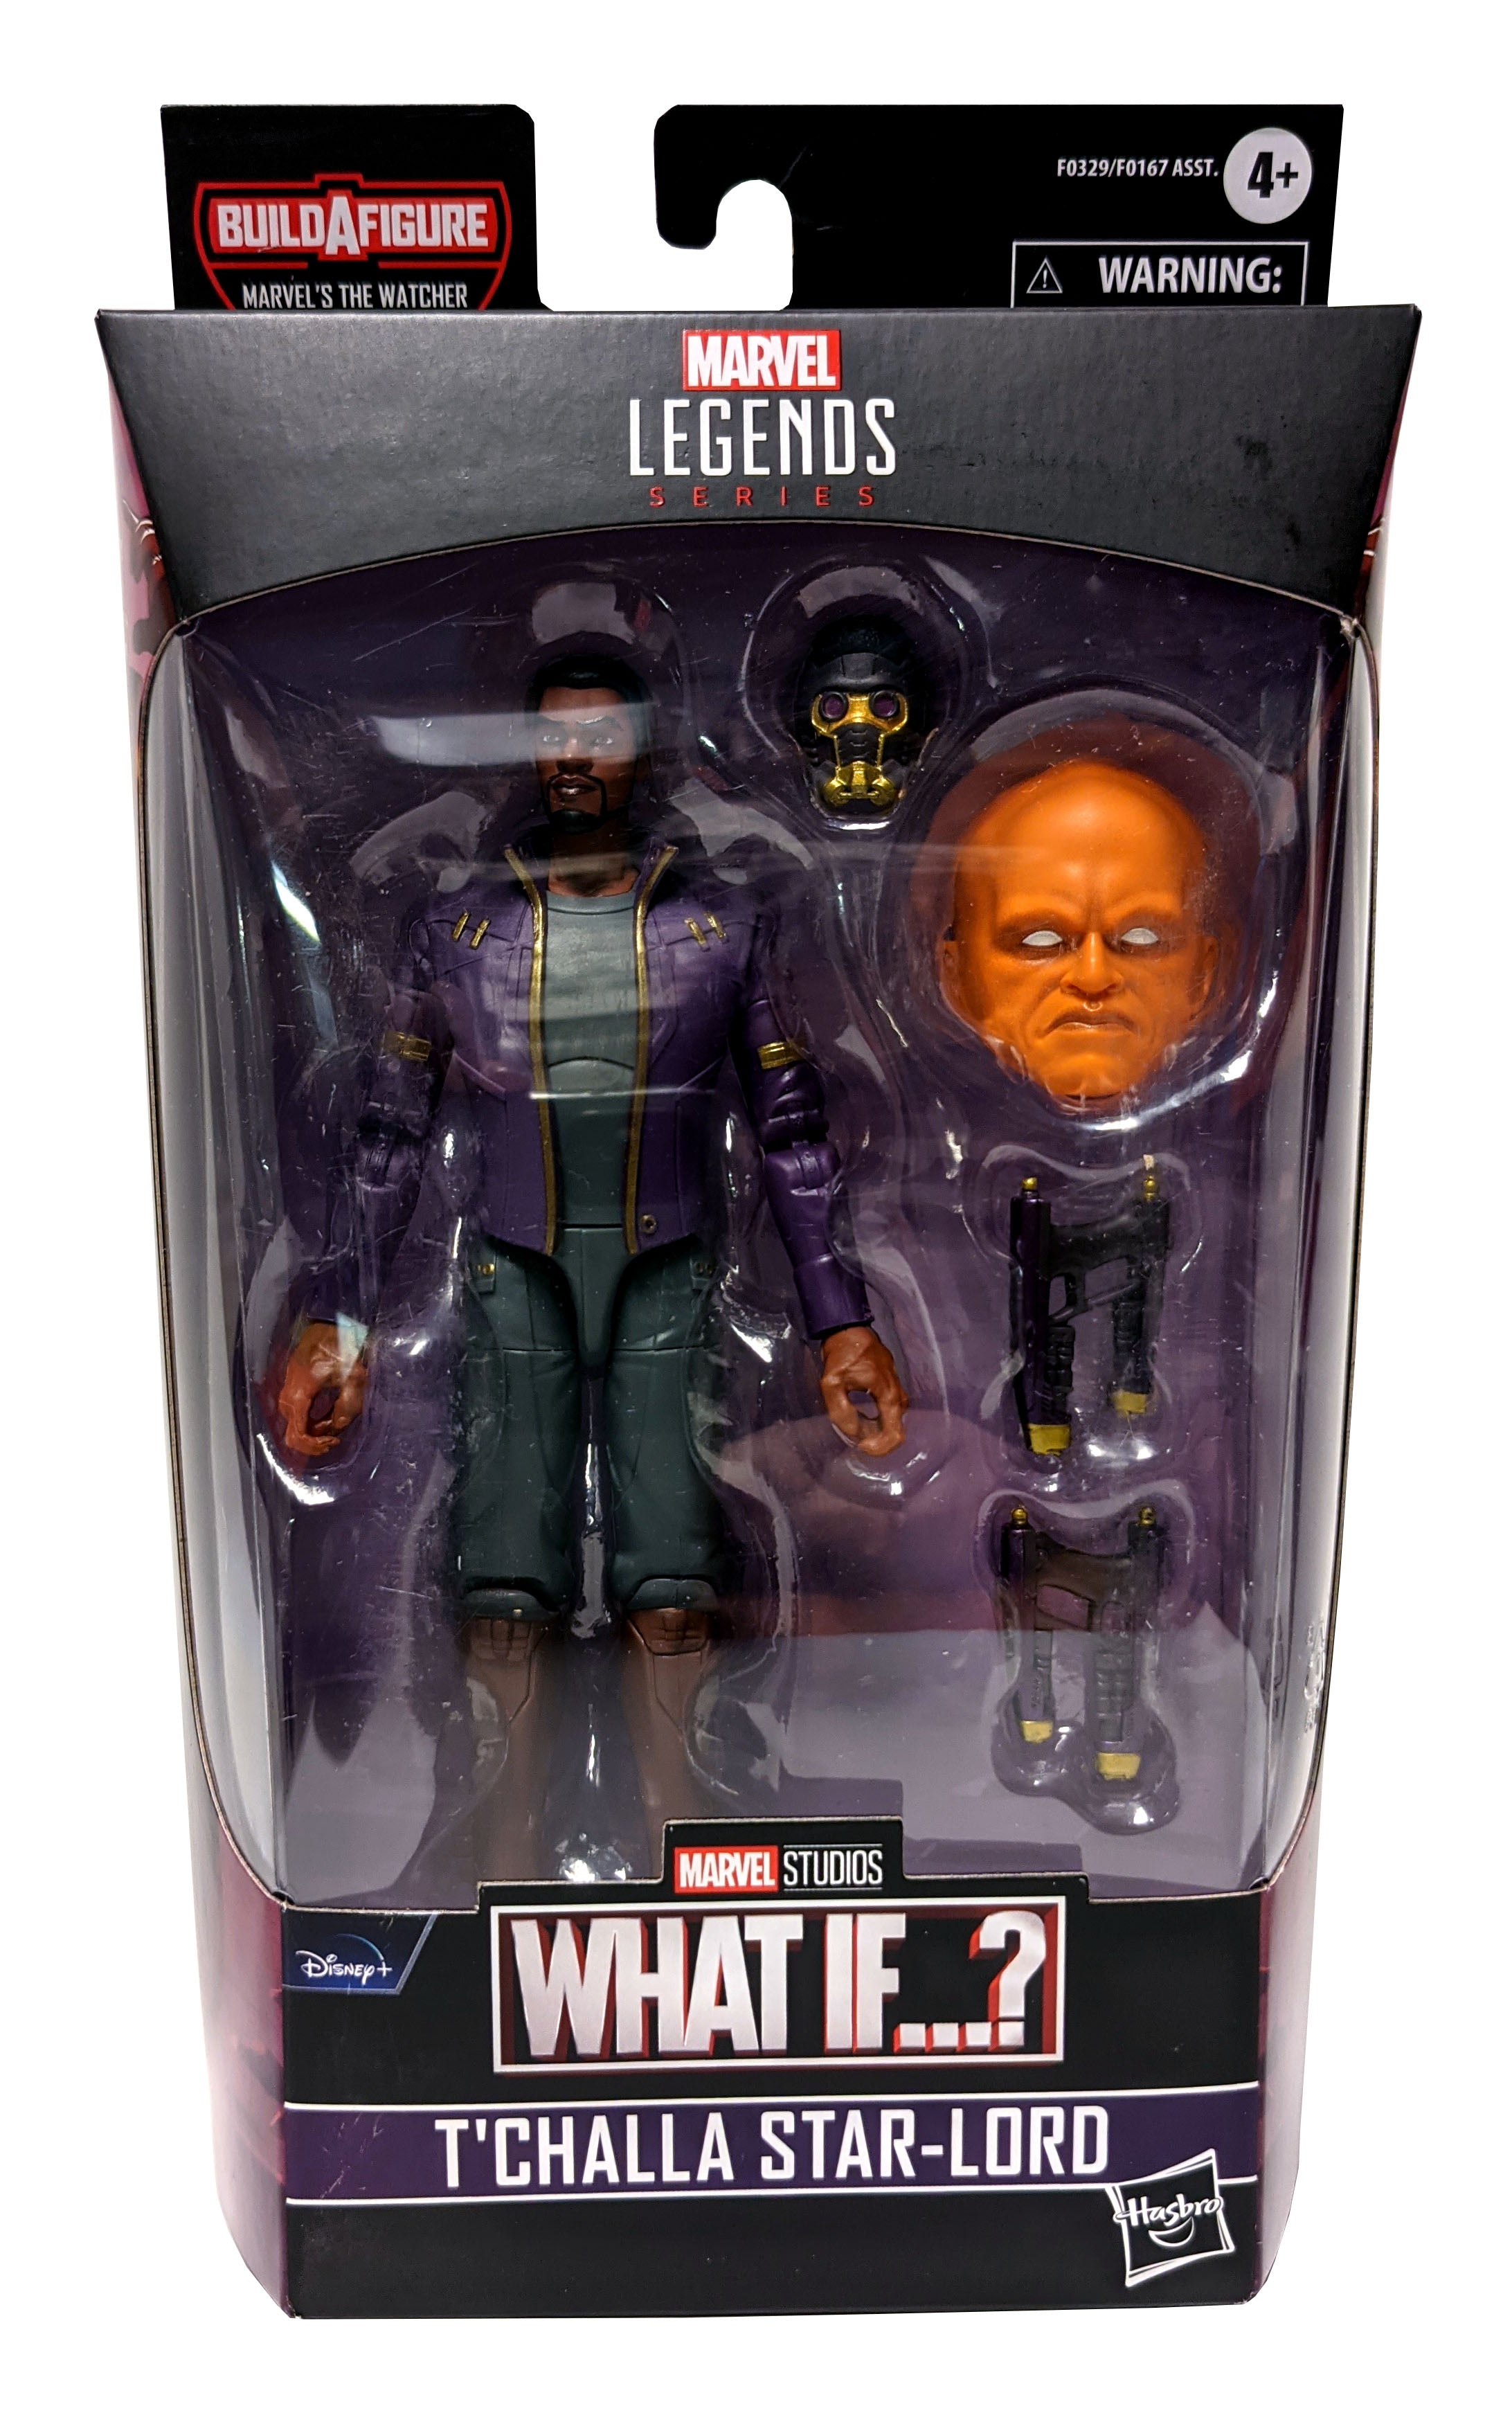 Marvel Legends T'Challa Star-Lord figure review – BAF The Watcher